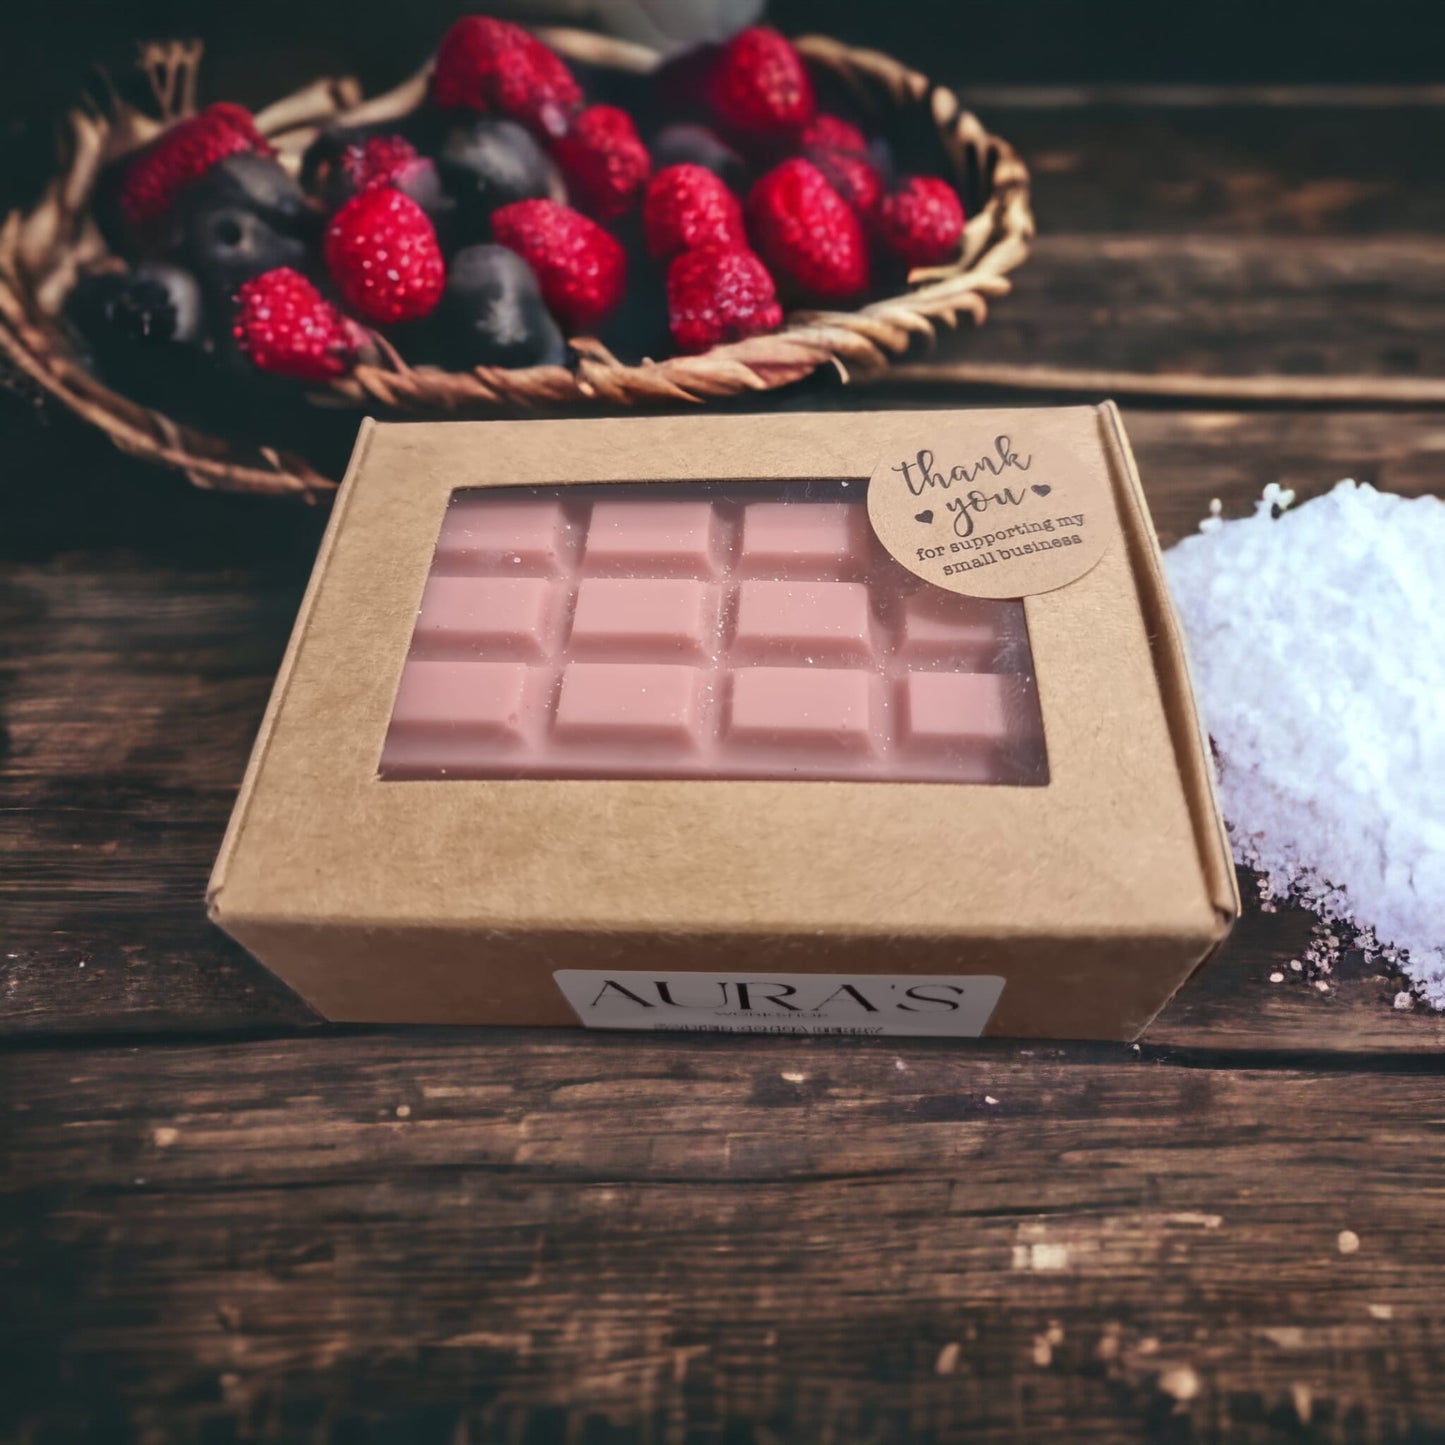 Salted Cocoa Berry Bliss Wax Bars - Auras Workshop  -  Wax Melts -   - Cyprus & Greece - Wholesale - Retail #